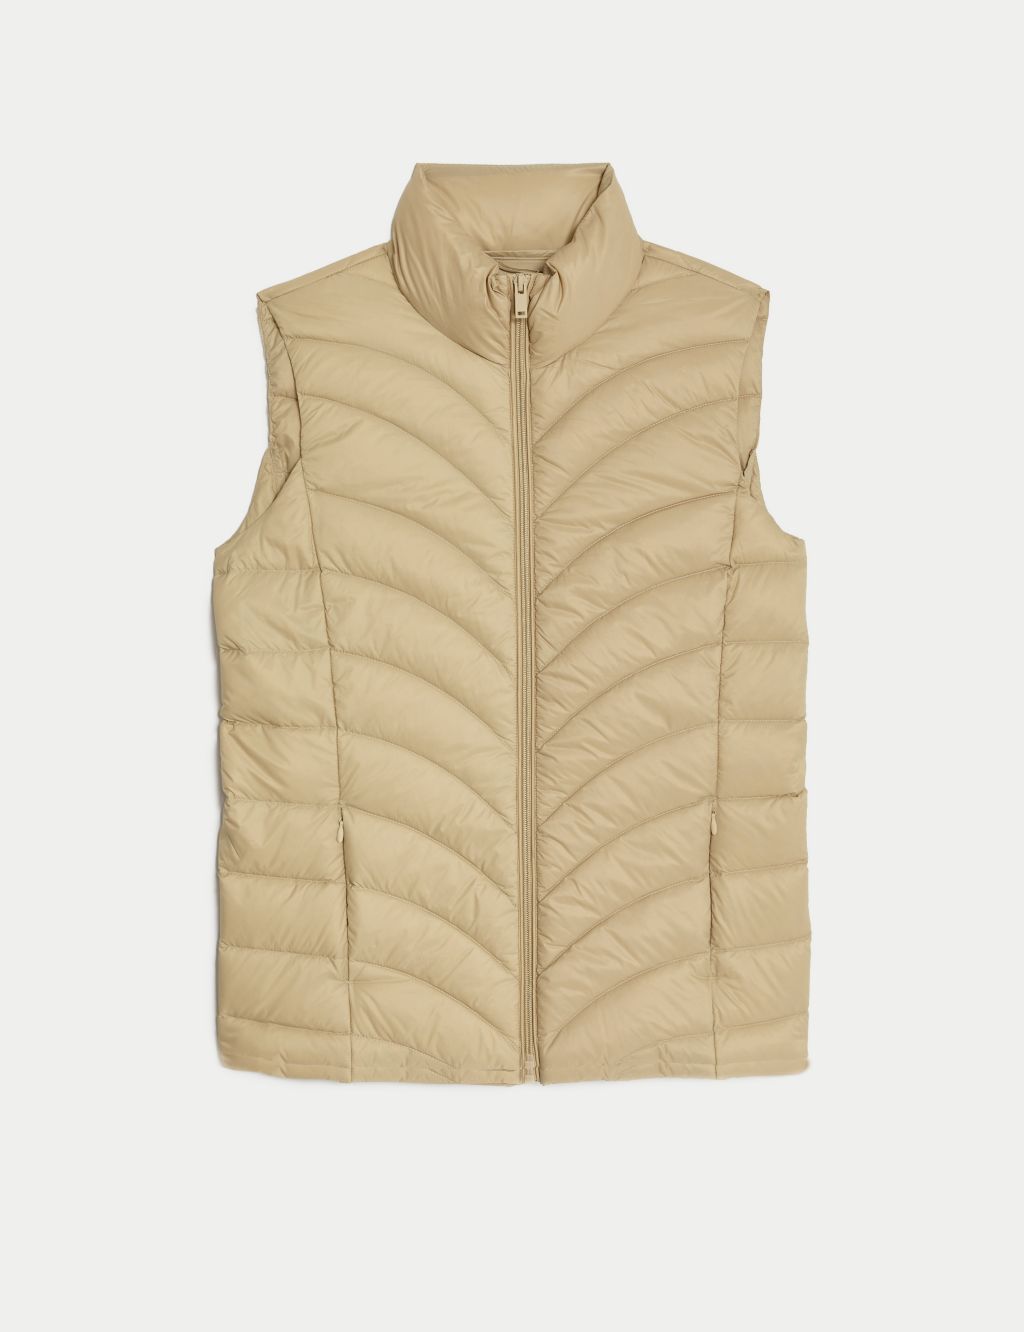 Feather & Down Packaway Puffer Gilet image 2